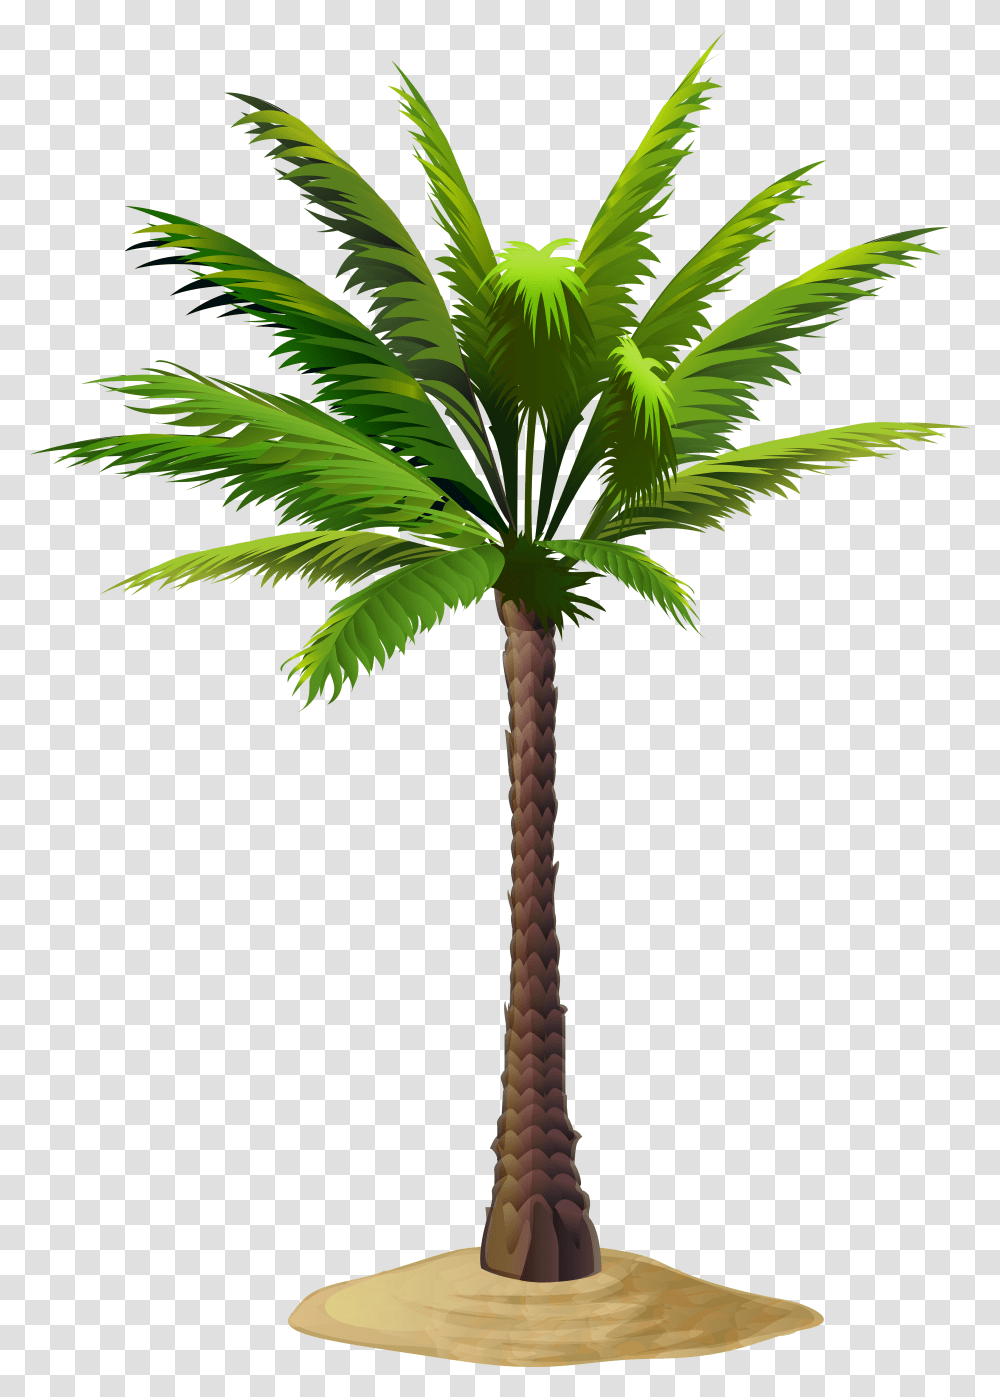 Free Clip Art Image Gallery Yopriceville Date Tree Palm Trees Transparent Png